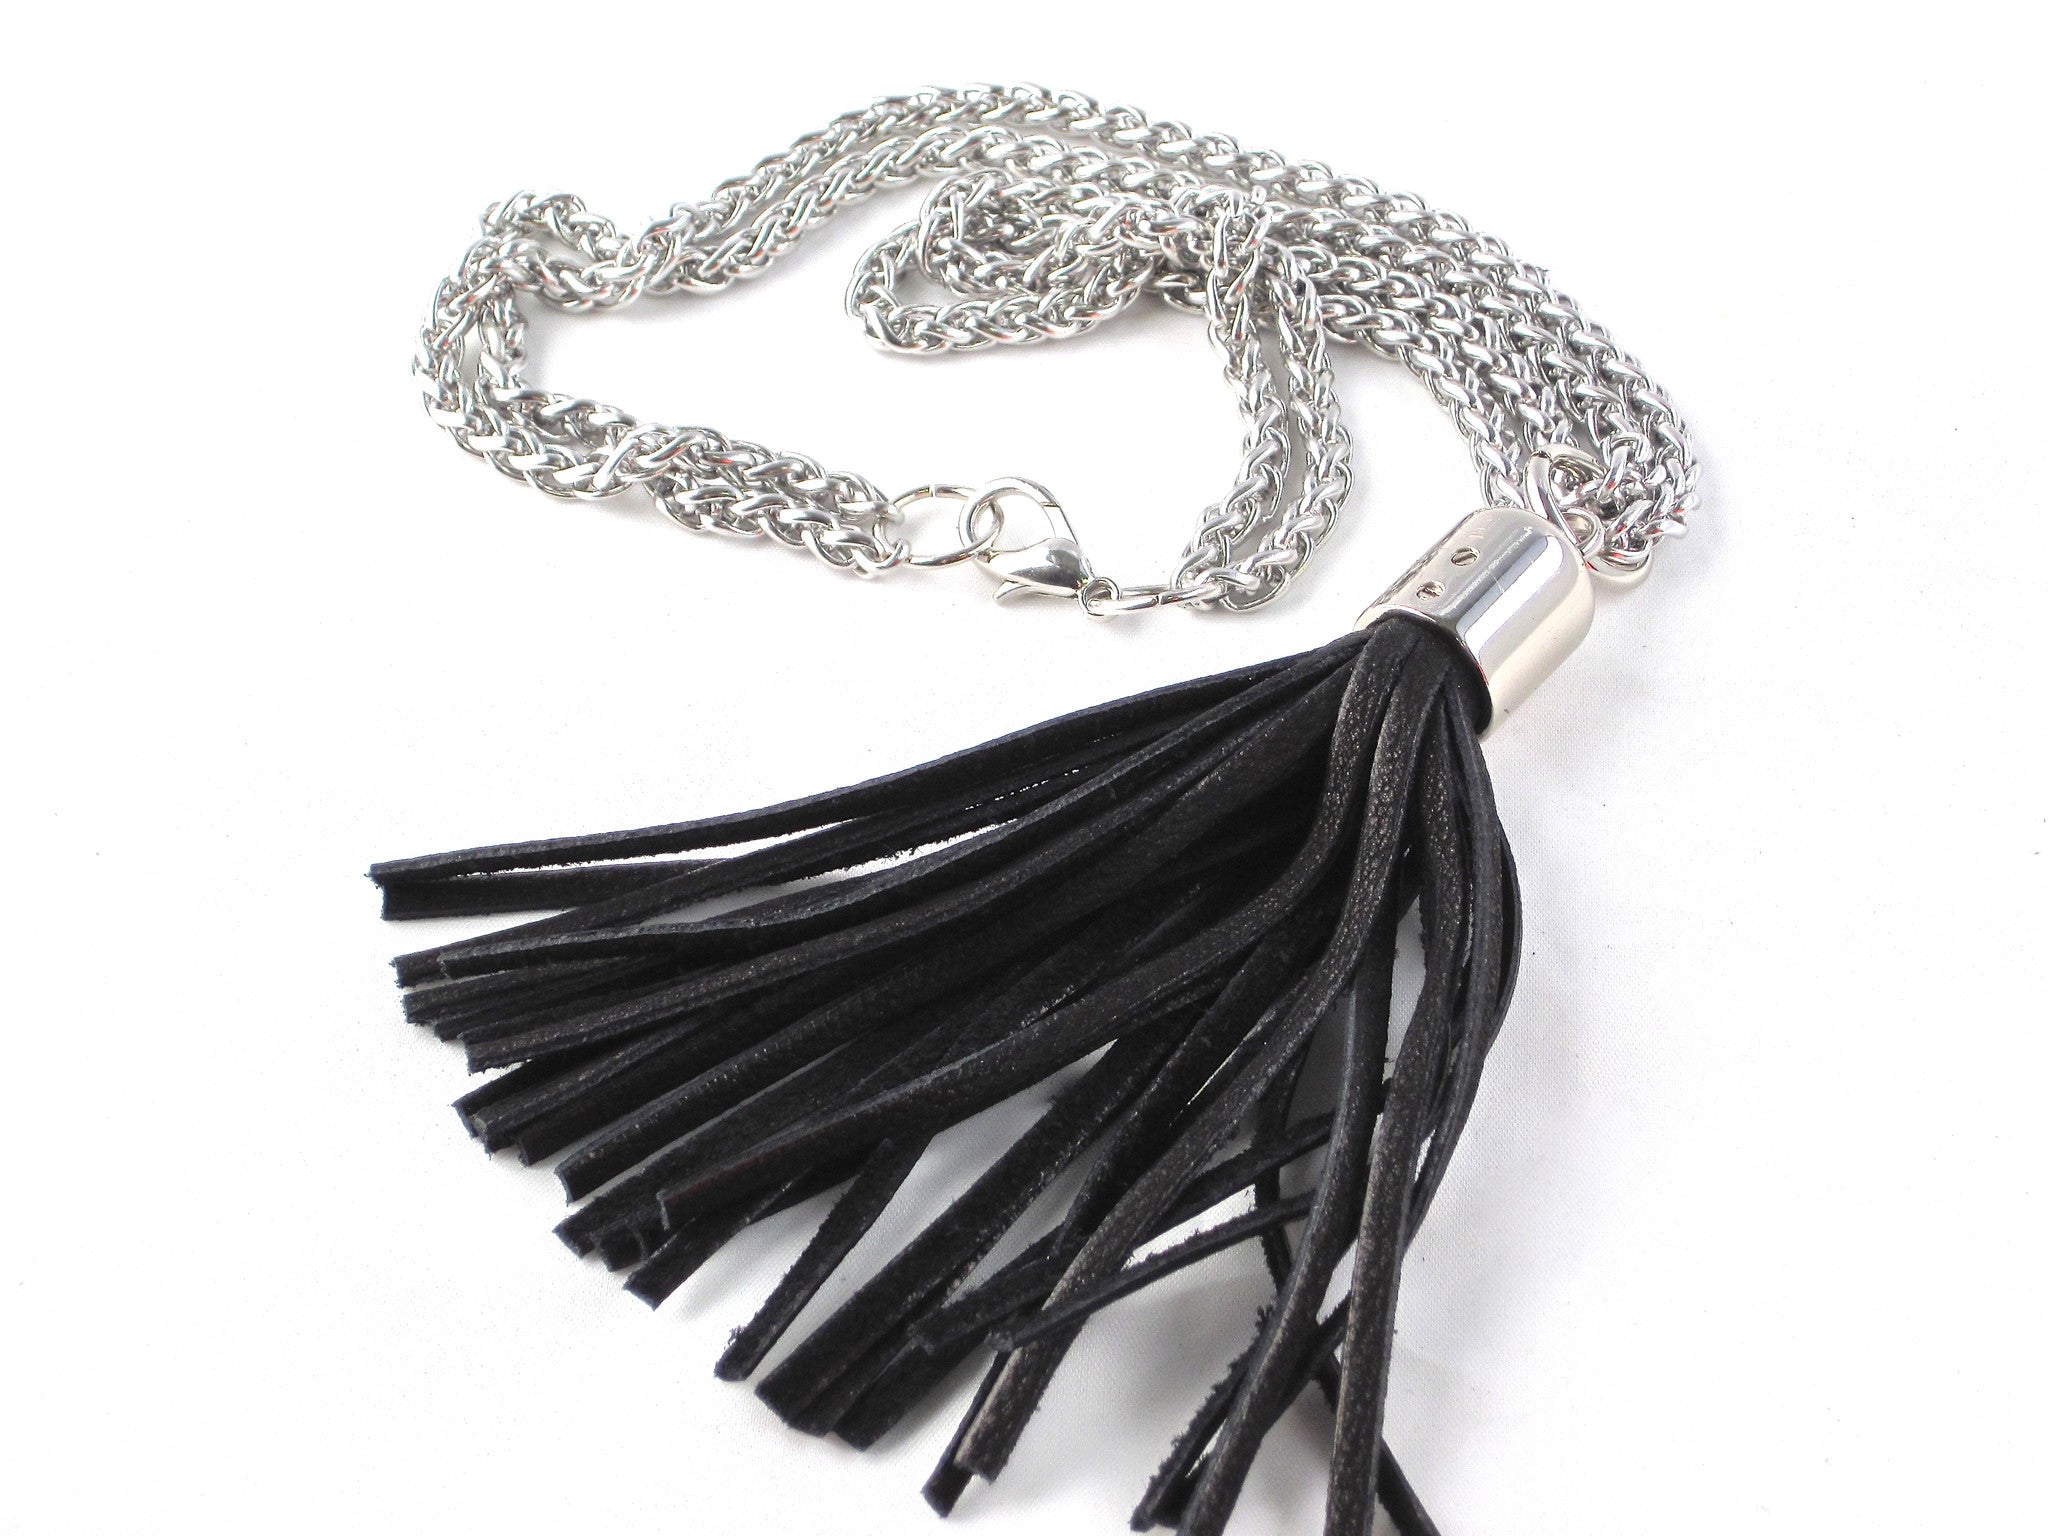 STAINLESS STEEL CHAINS AND LARGE DEERSKIN LEATHER TASSEL NECKLACE  by nyet jewelry.